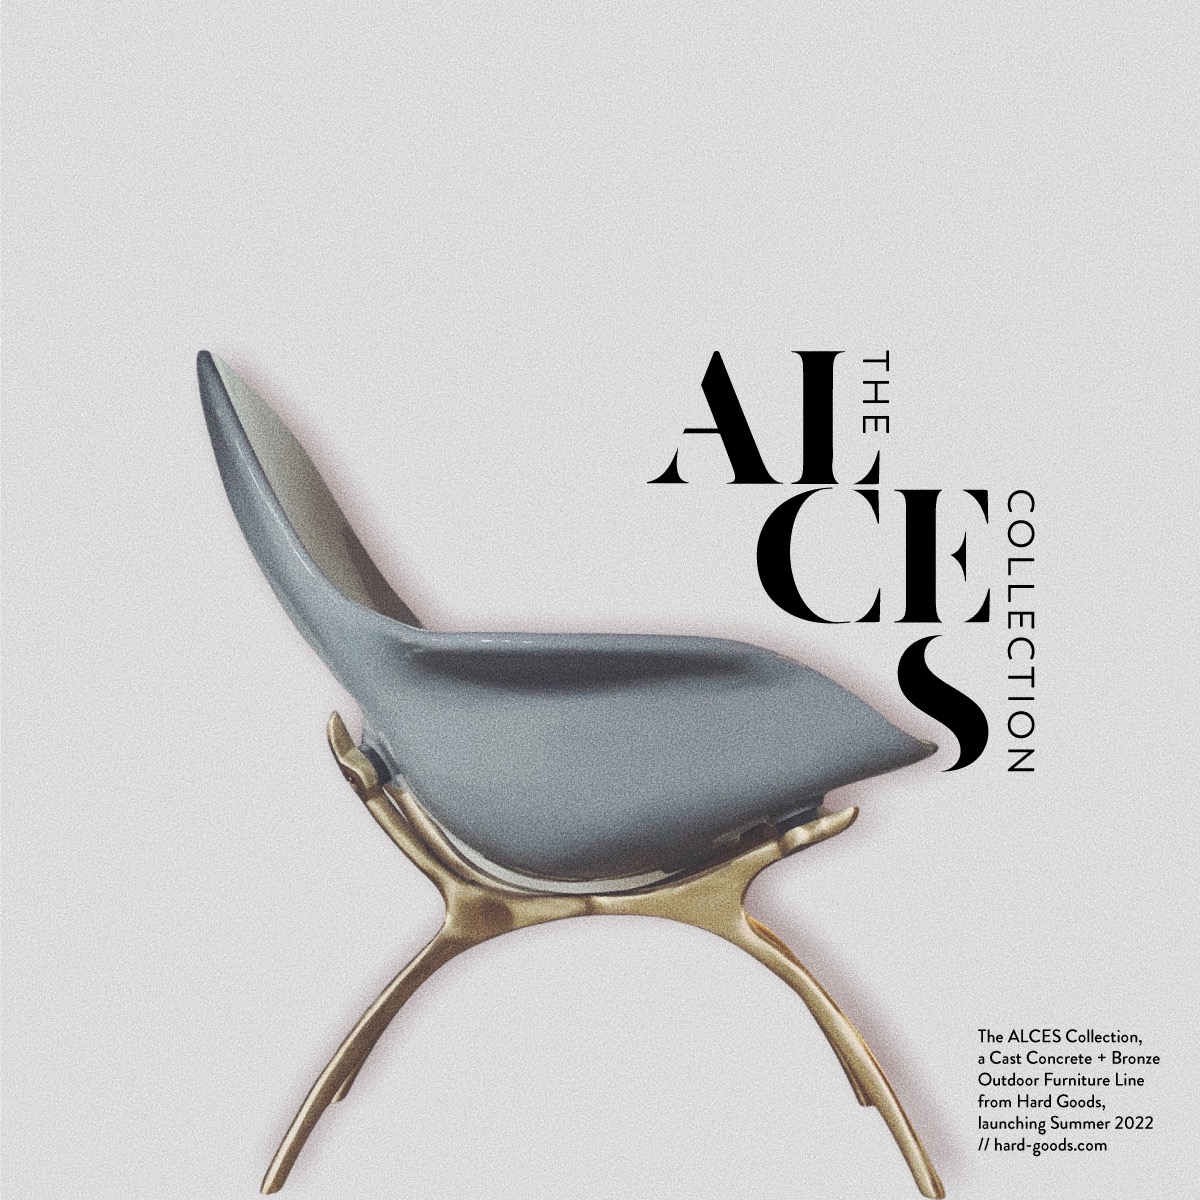 The ALCES Furniture Collection by Hard Goods - Cast Concrete and Bronze